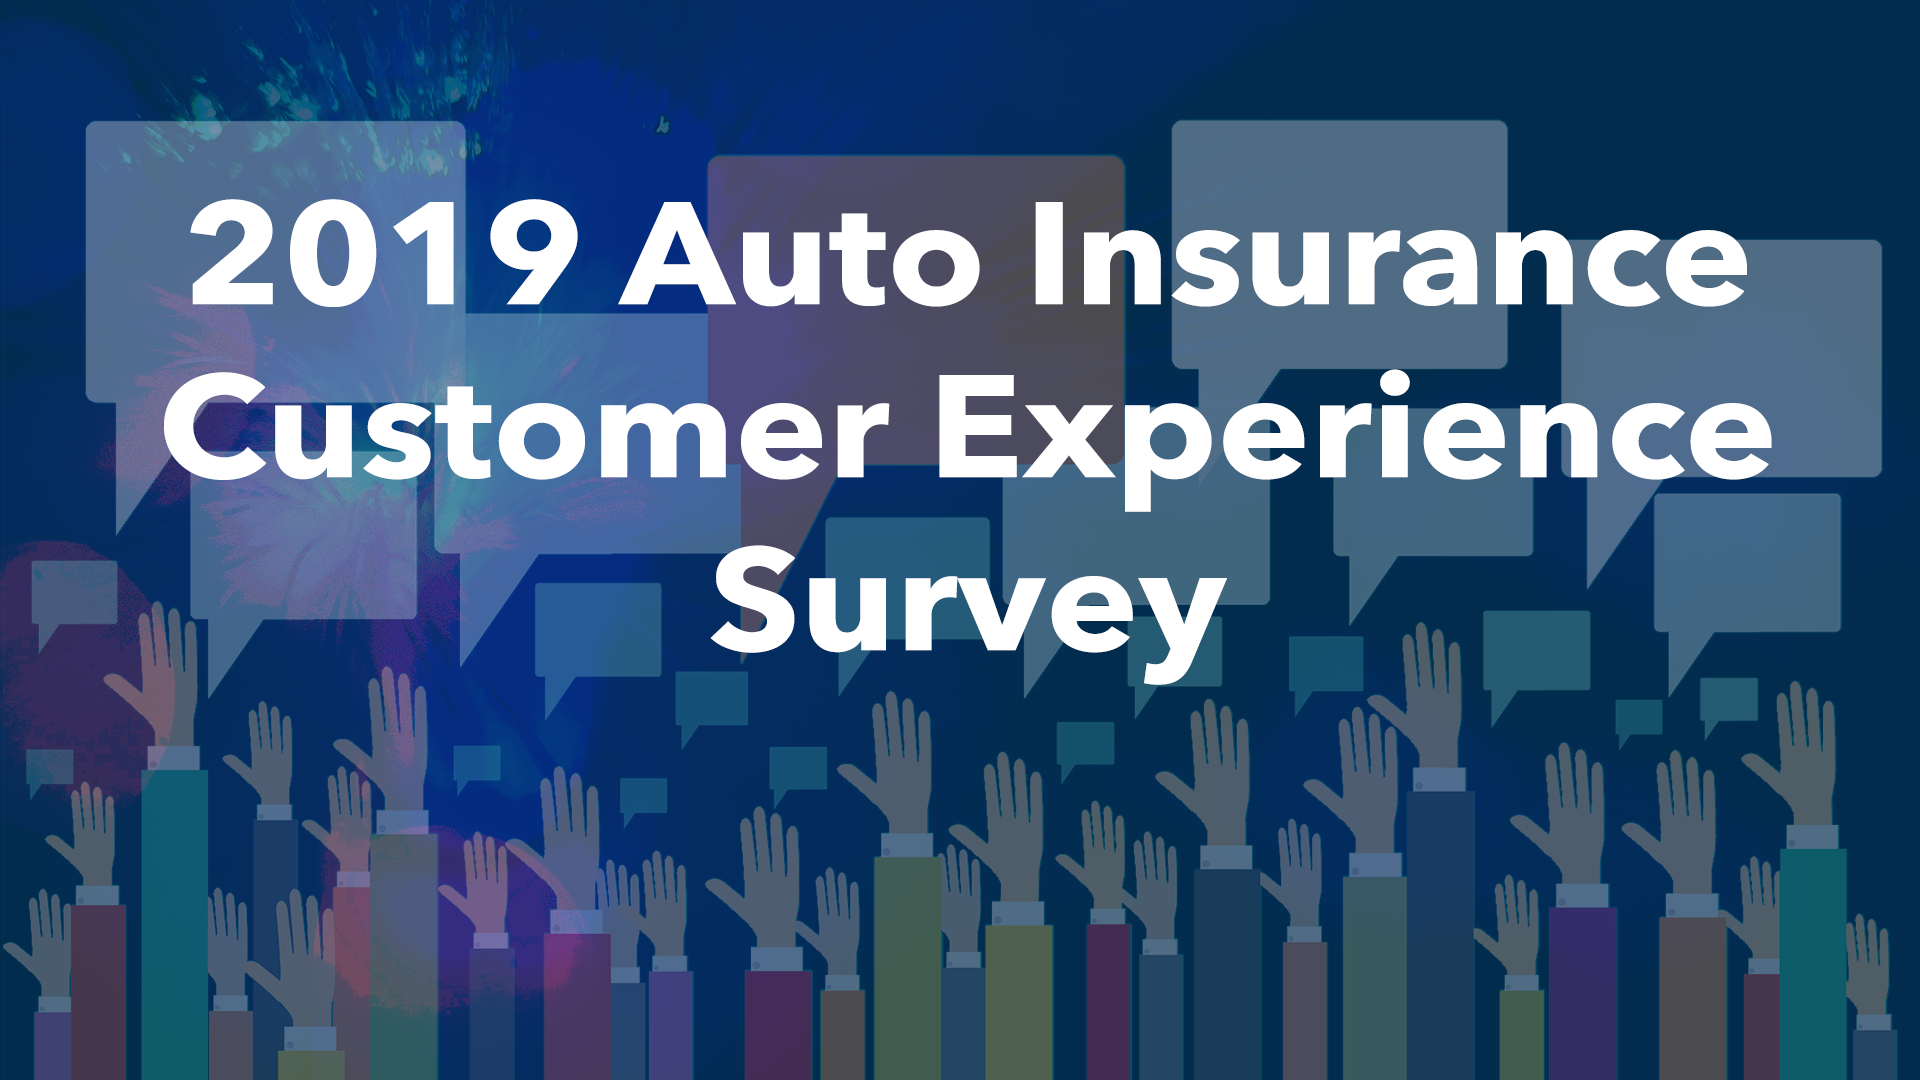 ACD Survey Reveals Customer Insight Into the Claims Experience